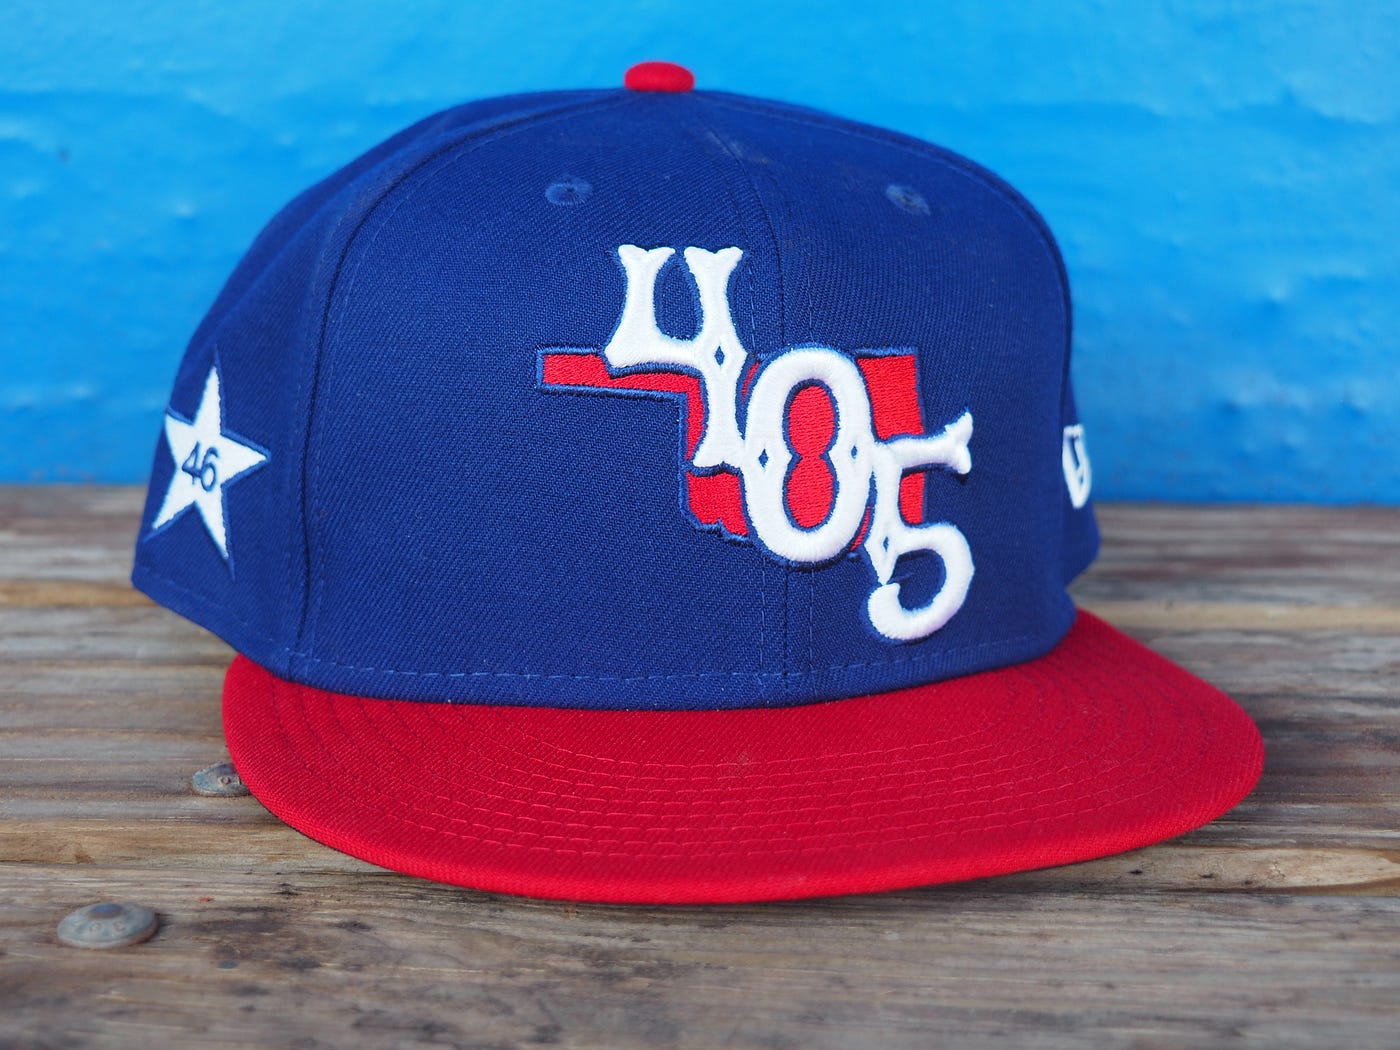 New On-Field Cap Unveiled. A fresh addition to the on-field…